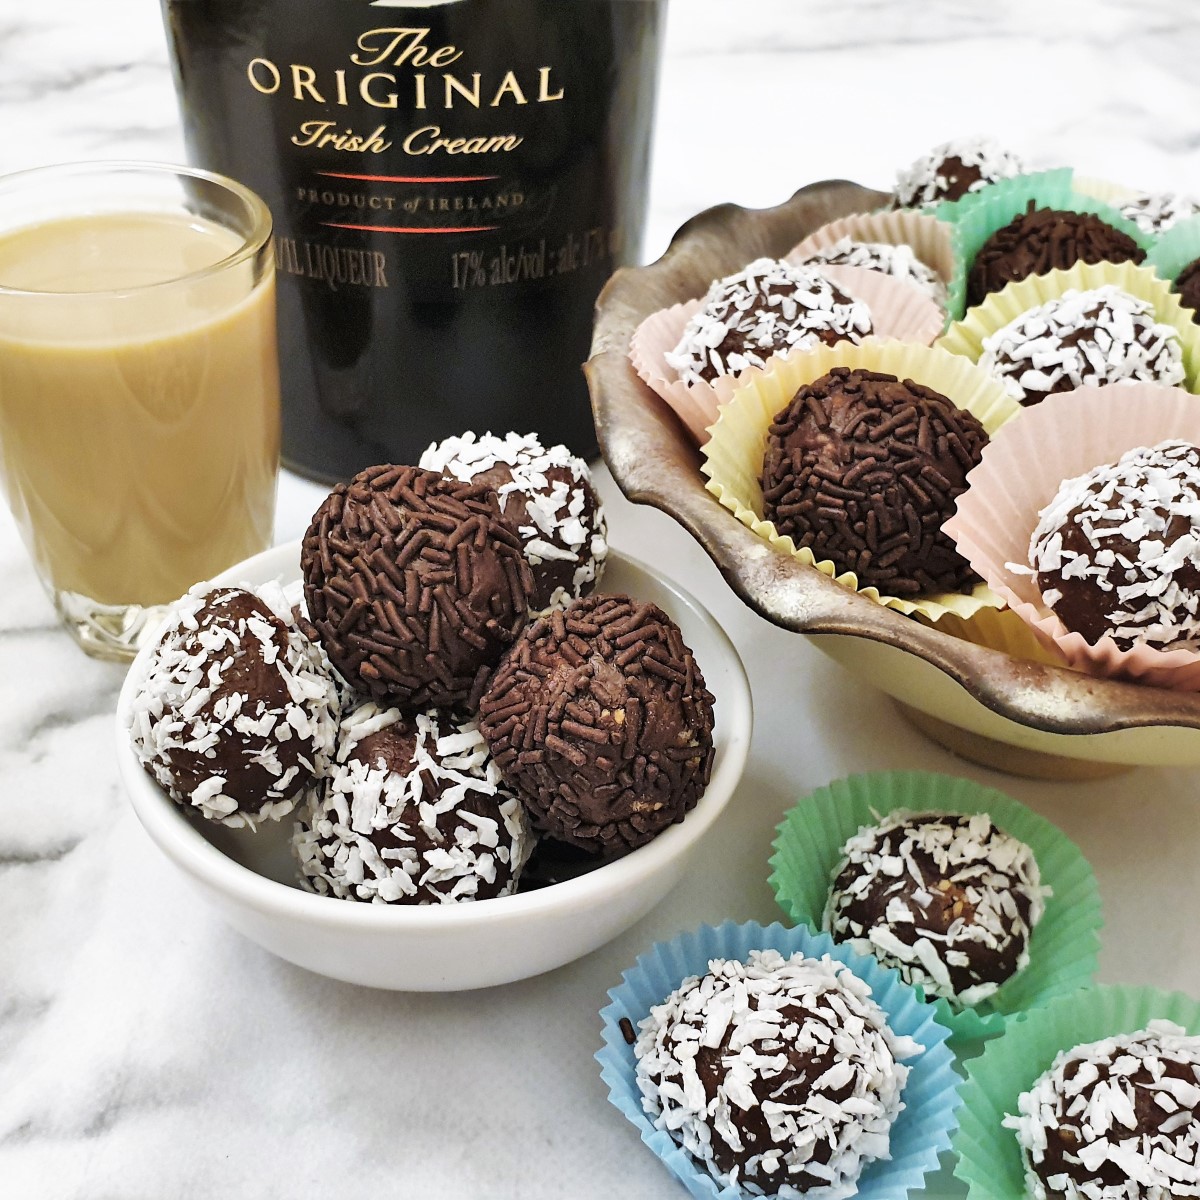 A dish of chocolate truffles, rolled in coocnut and chocolate sprinkles, in front of a bottle of Baileys.